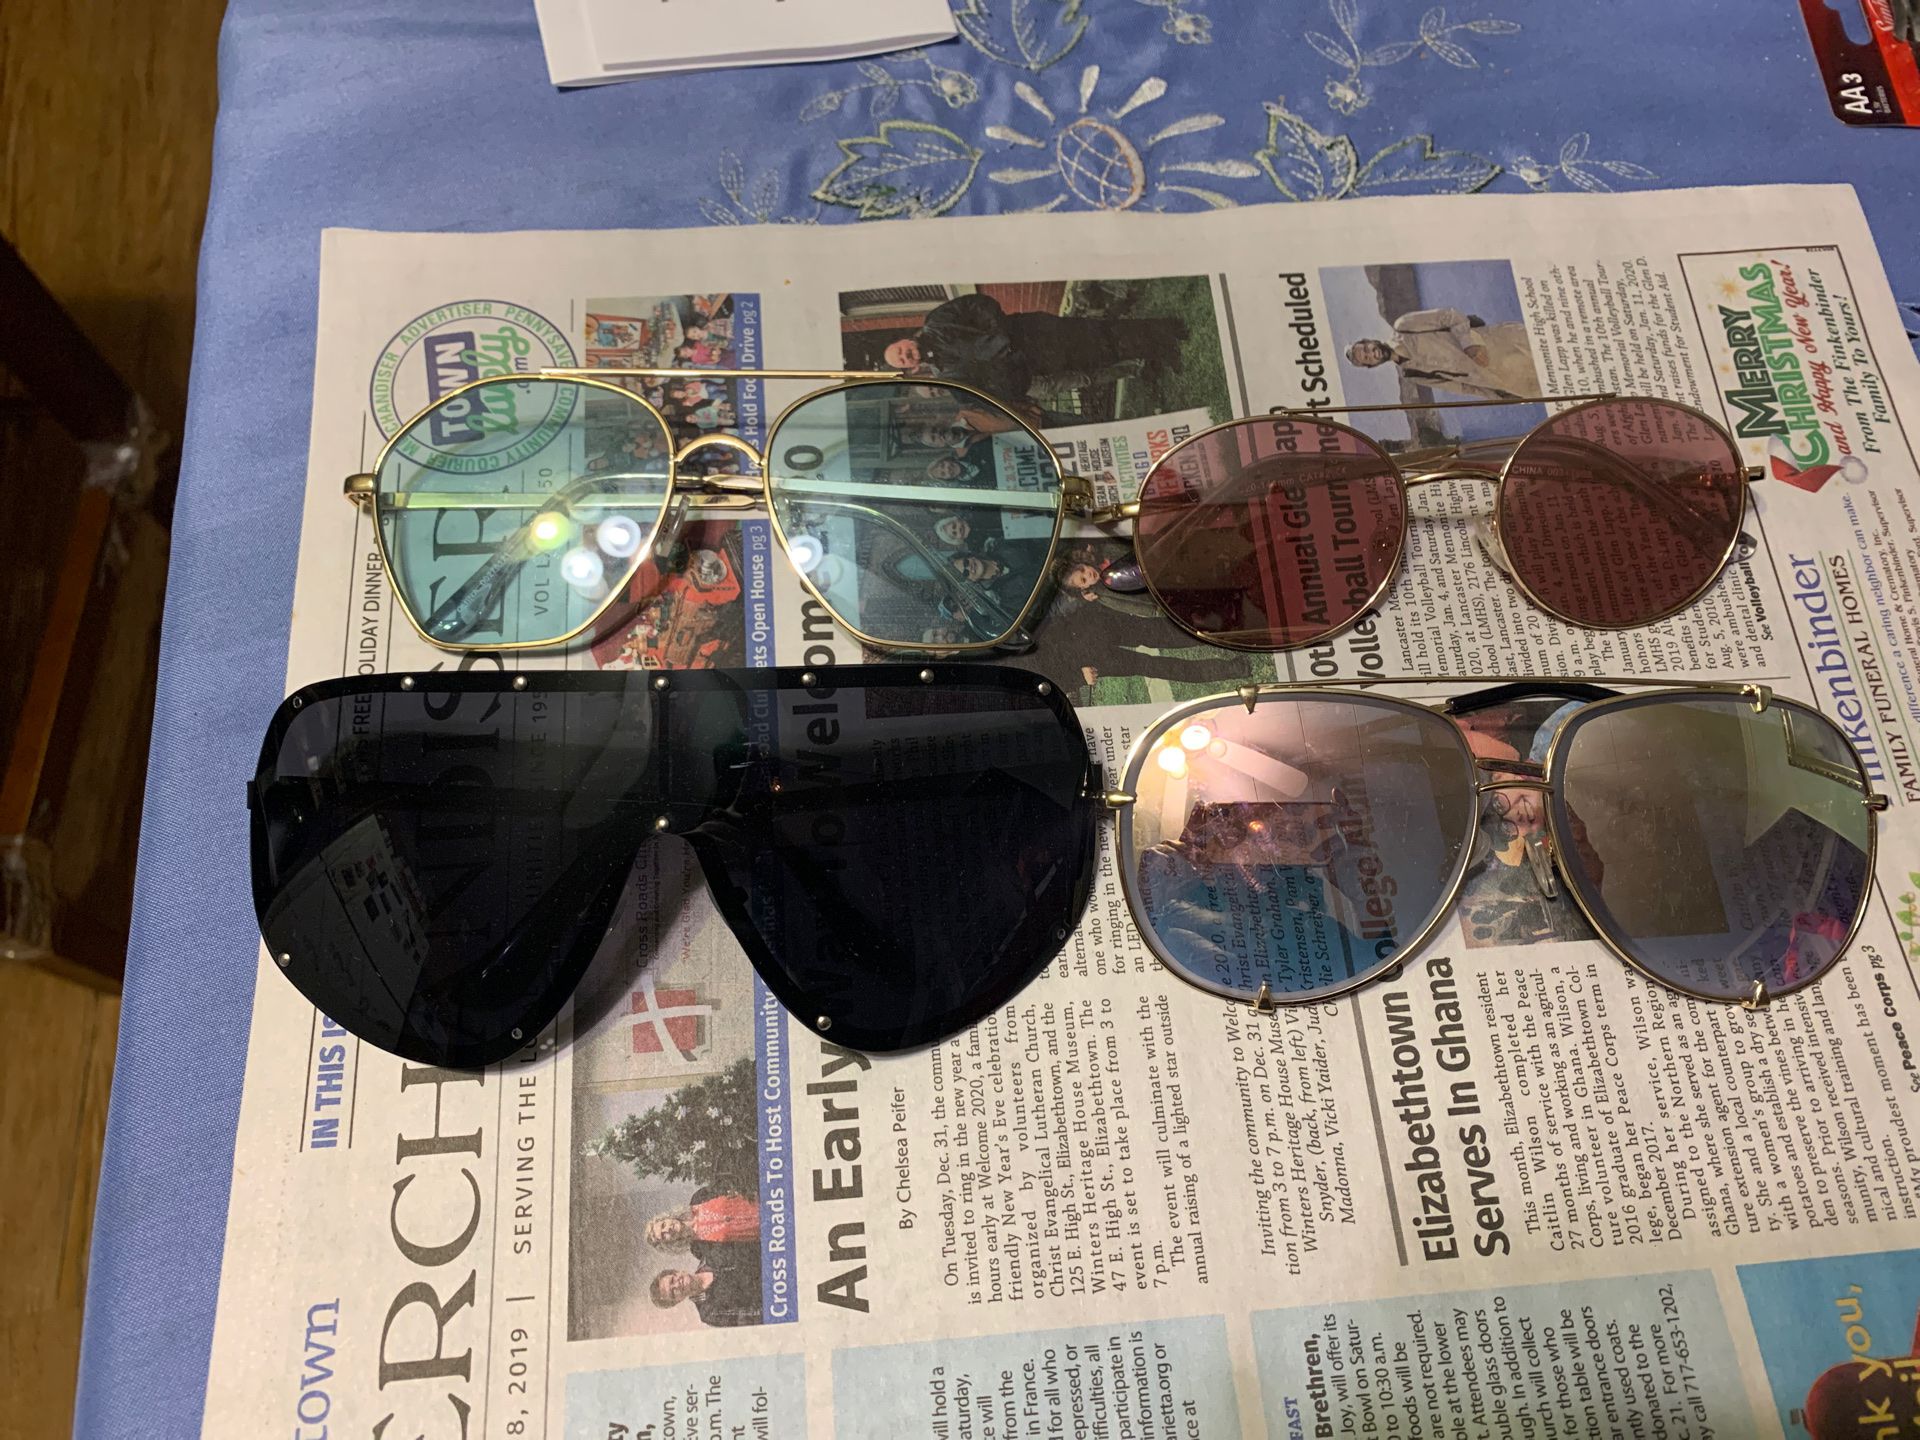 4 different styles of sunglasses